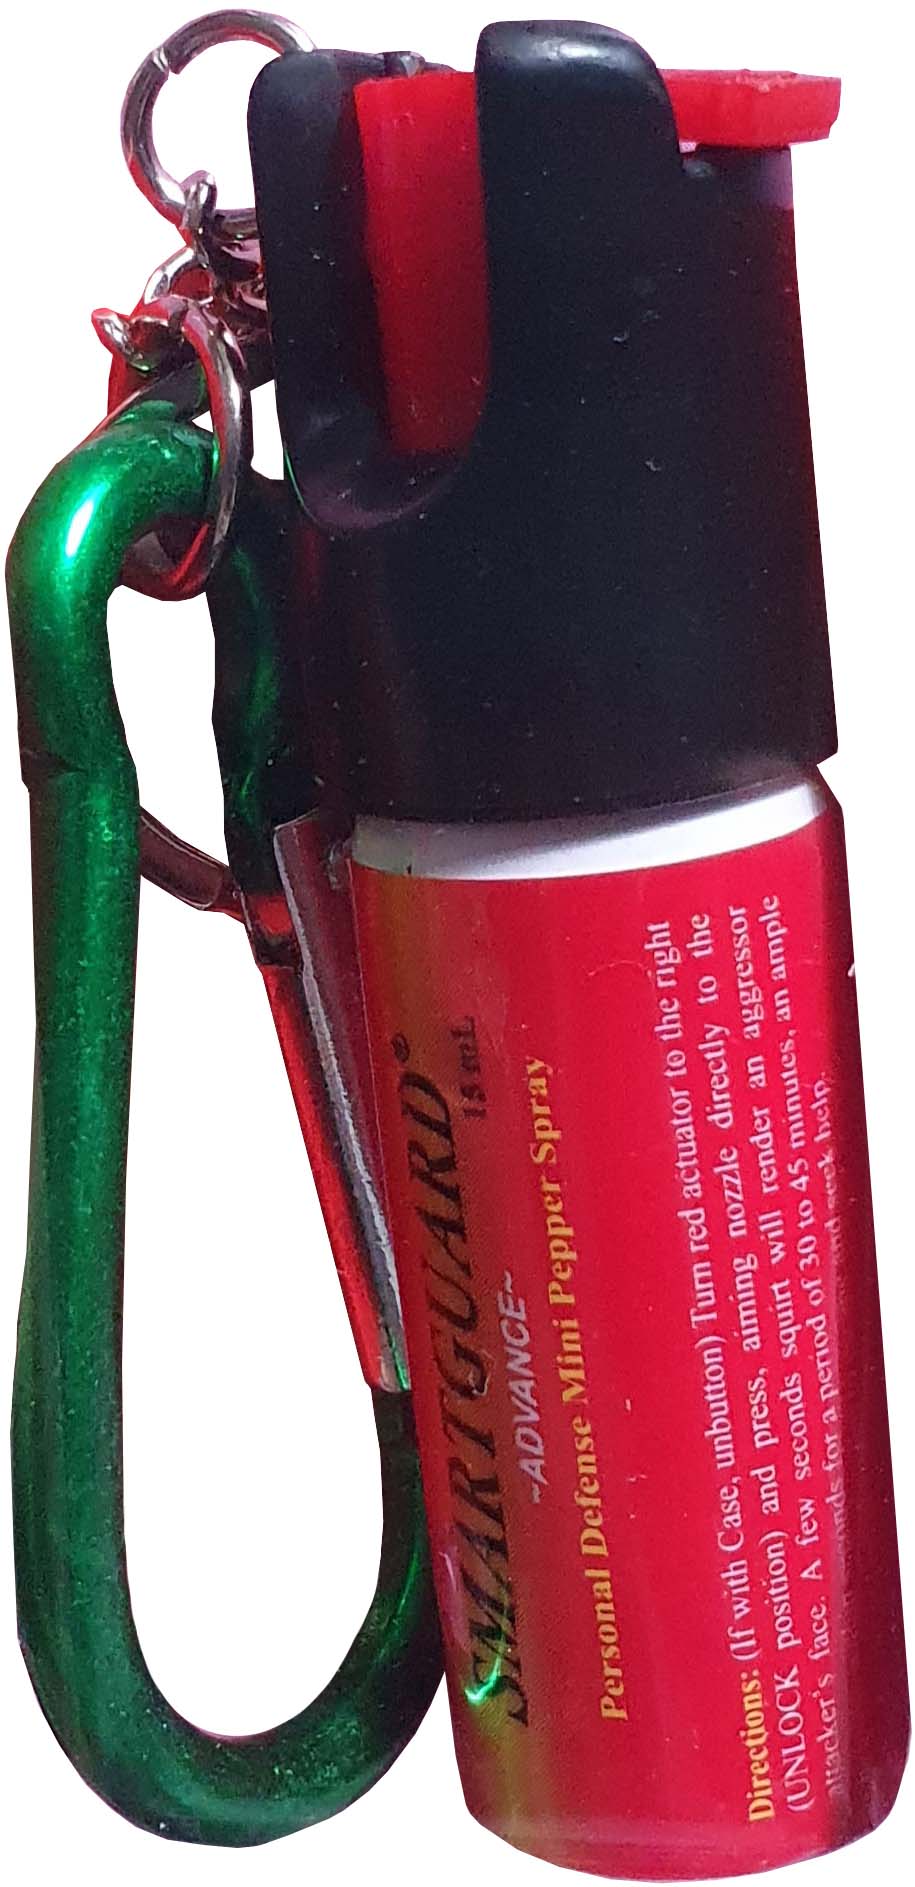 Mini Pepper Spray With Safe Lock Function